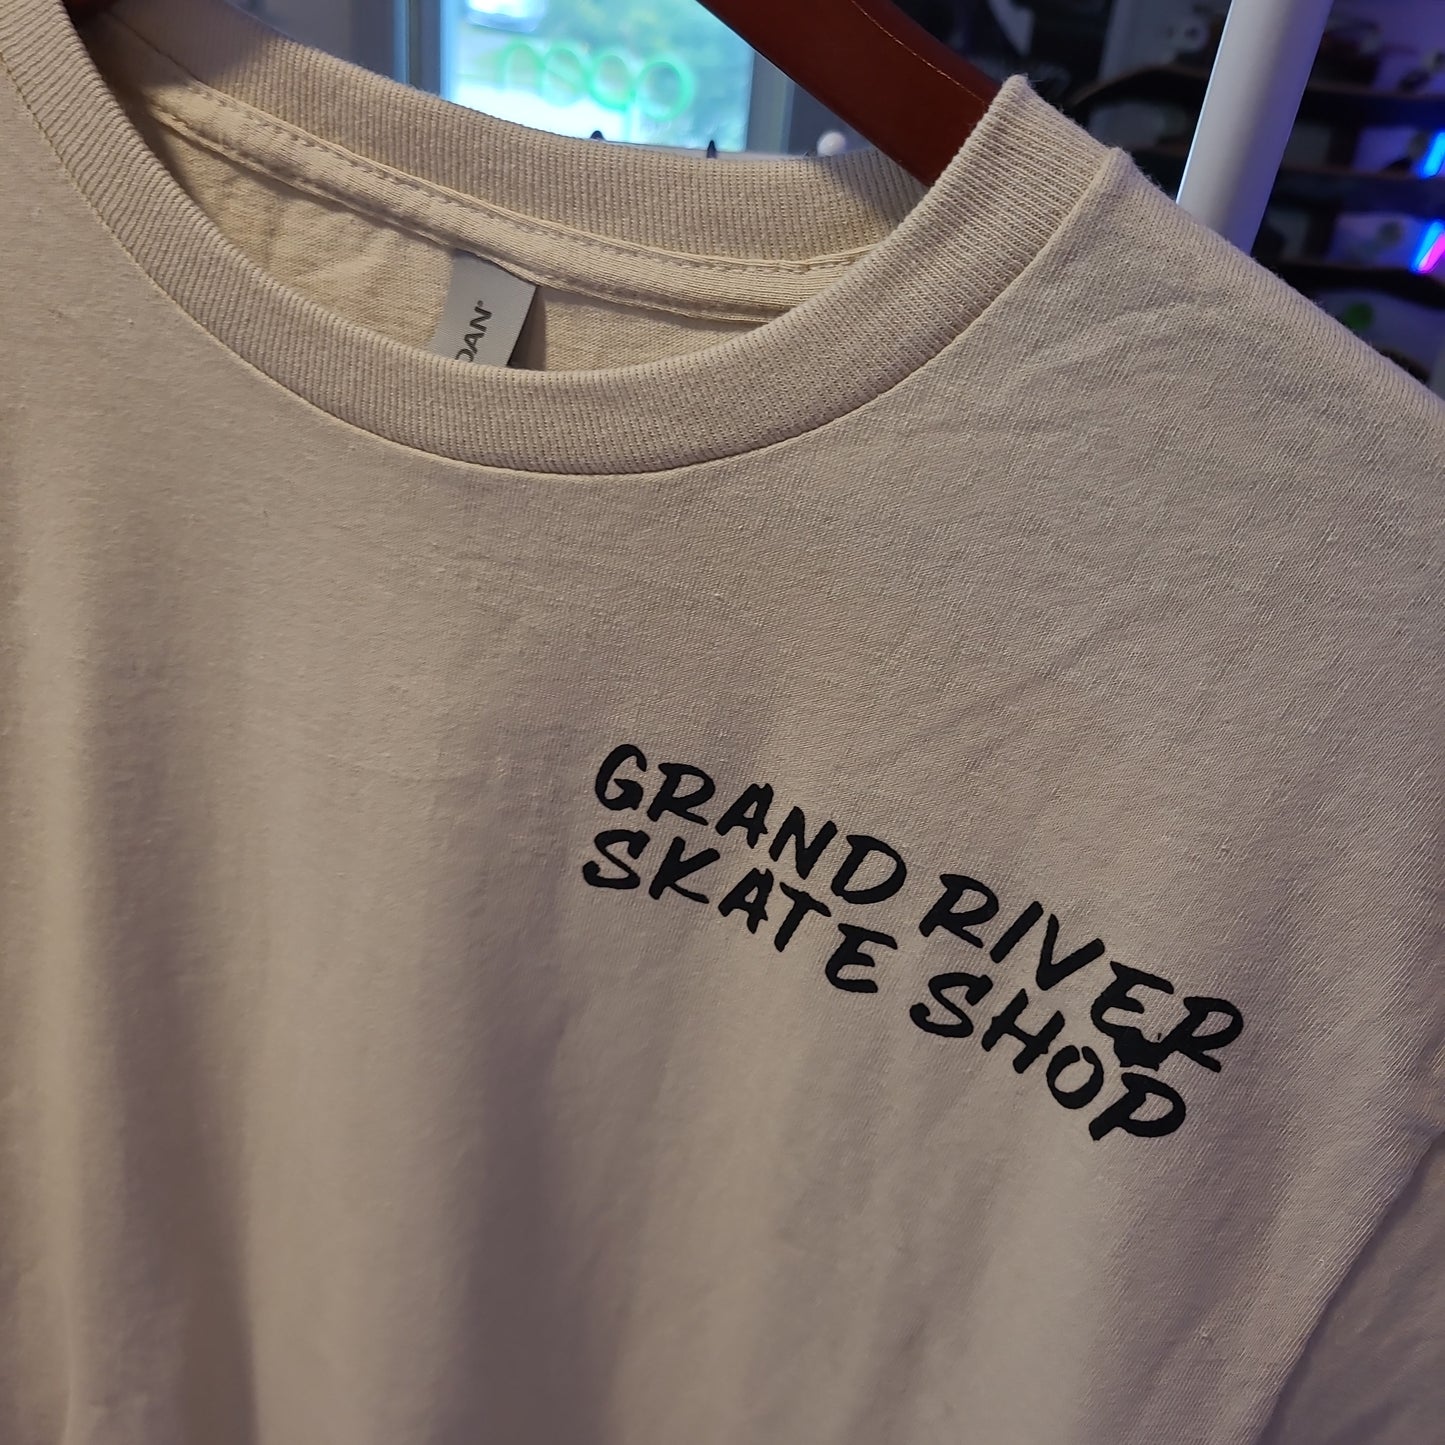 Grand River - Double Vision Youth T-Shirt (Tan)